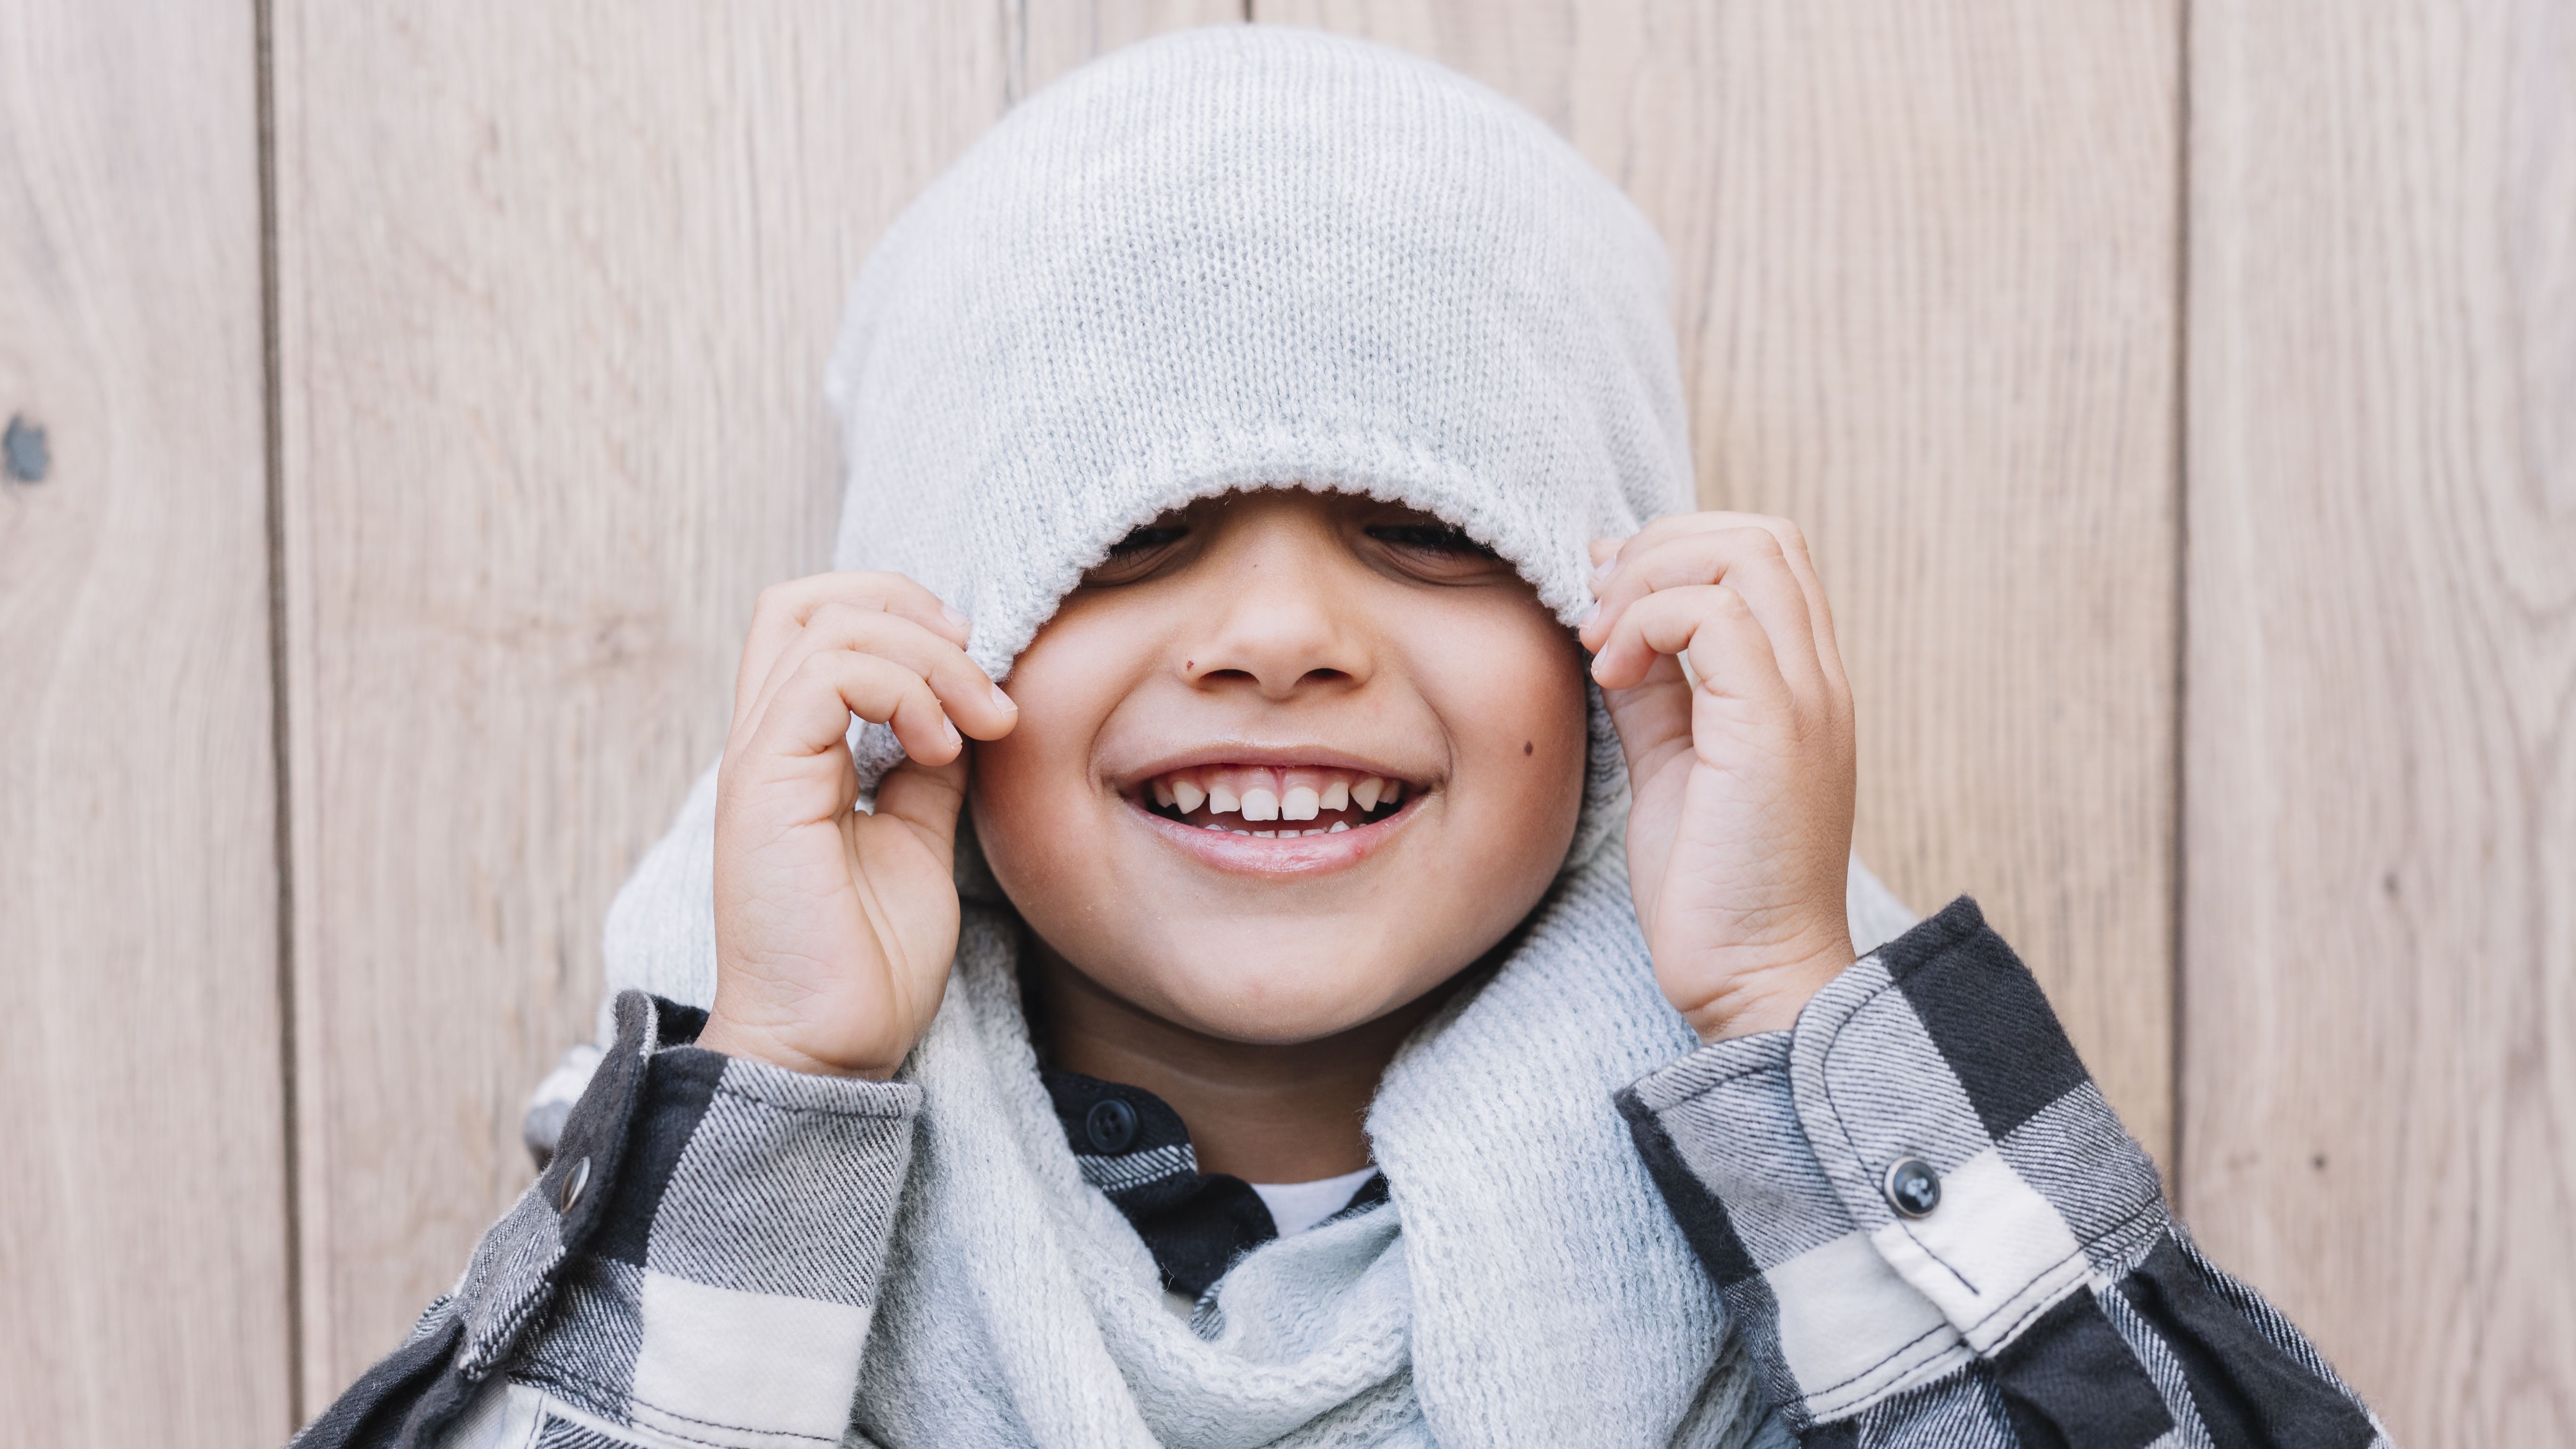 Little Boy Covering Eyes With Winter Cap